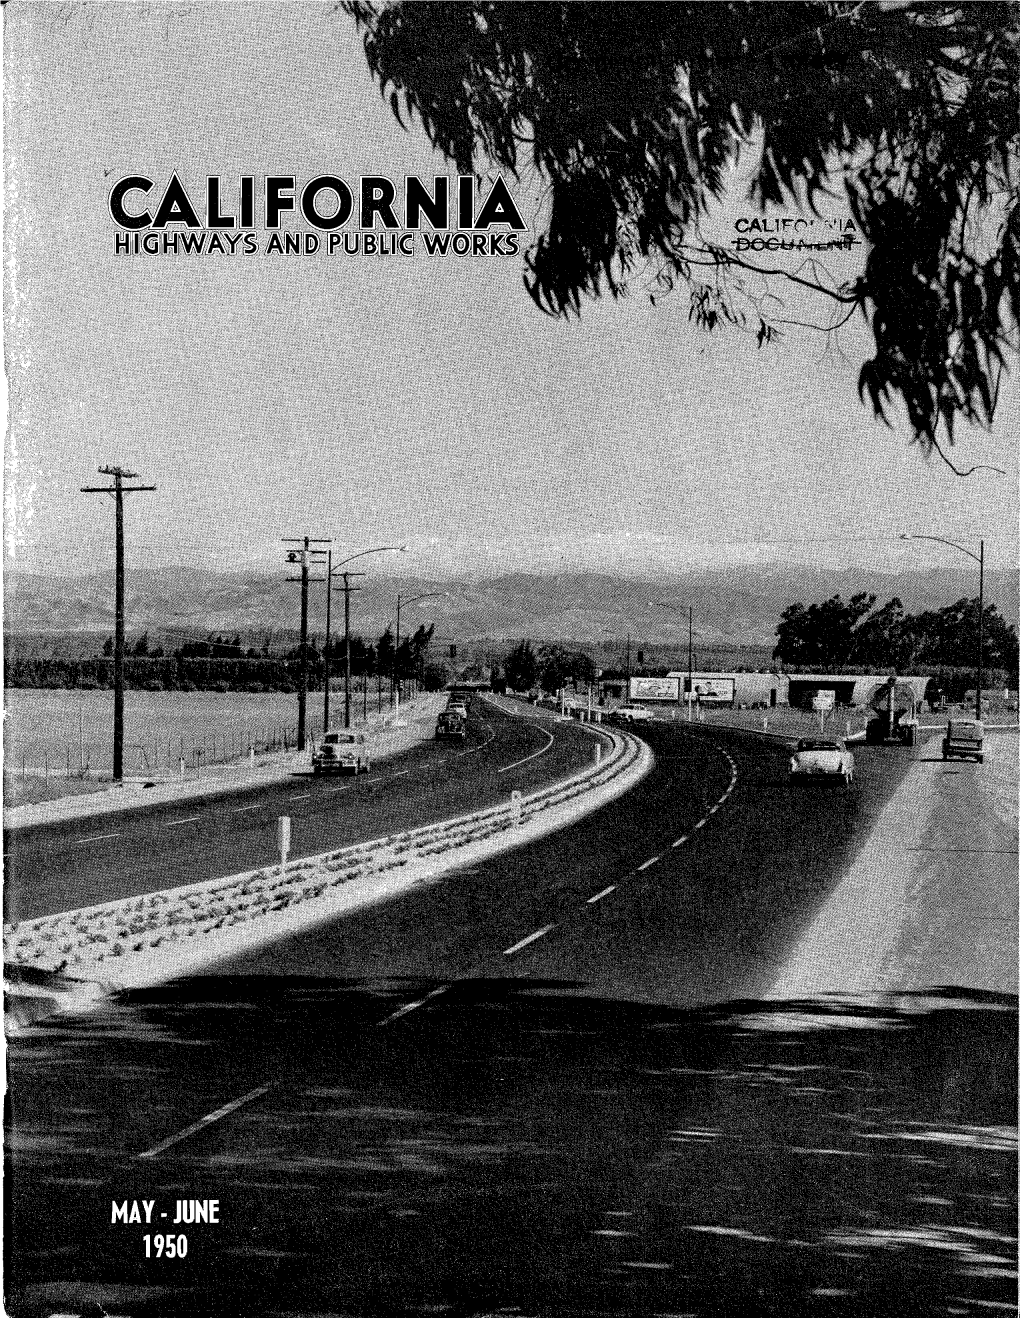 California Highways and Public Works, May-June 1950